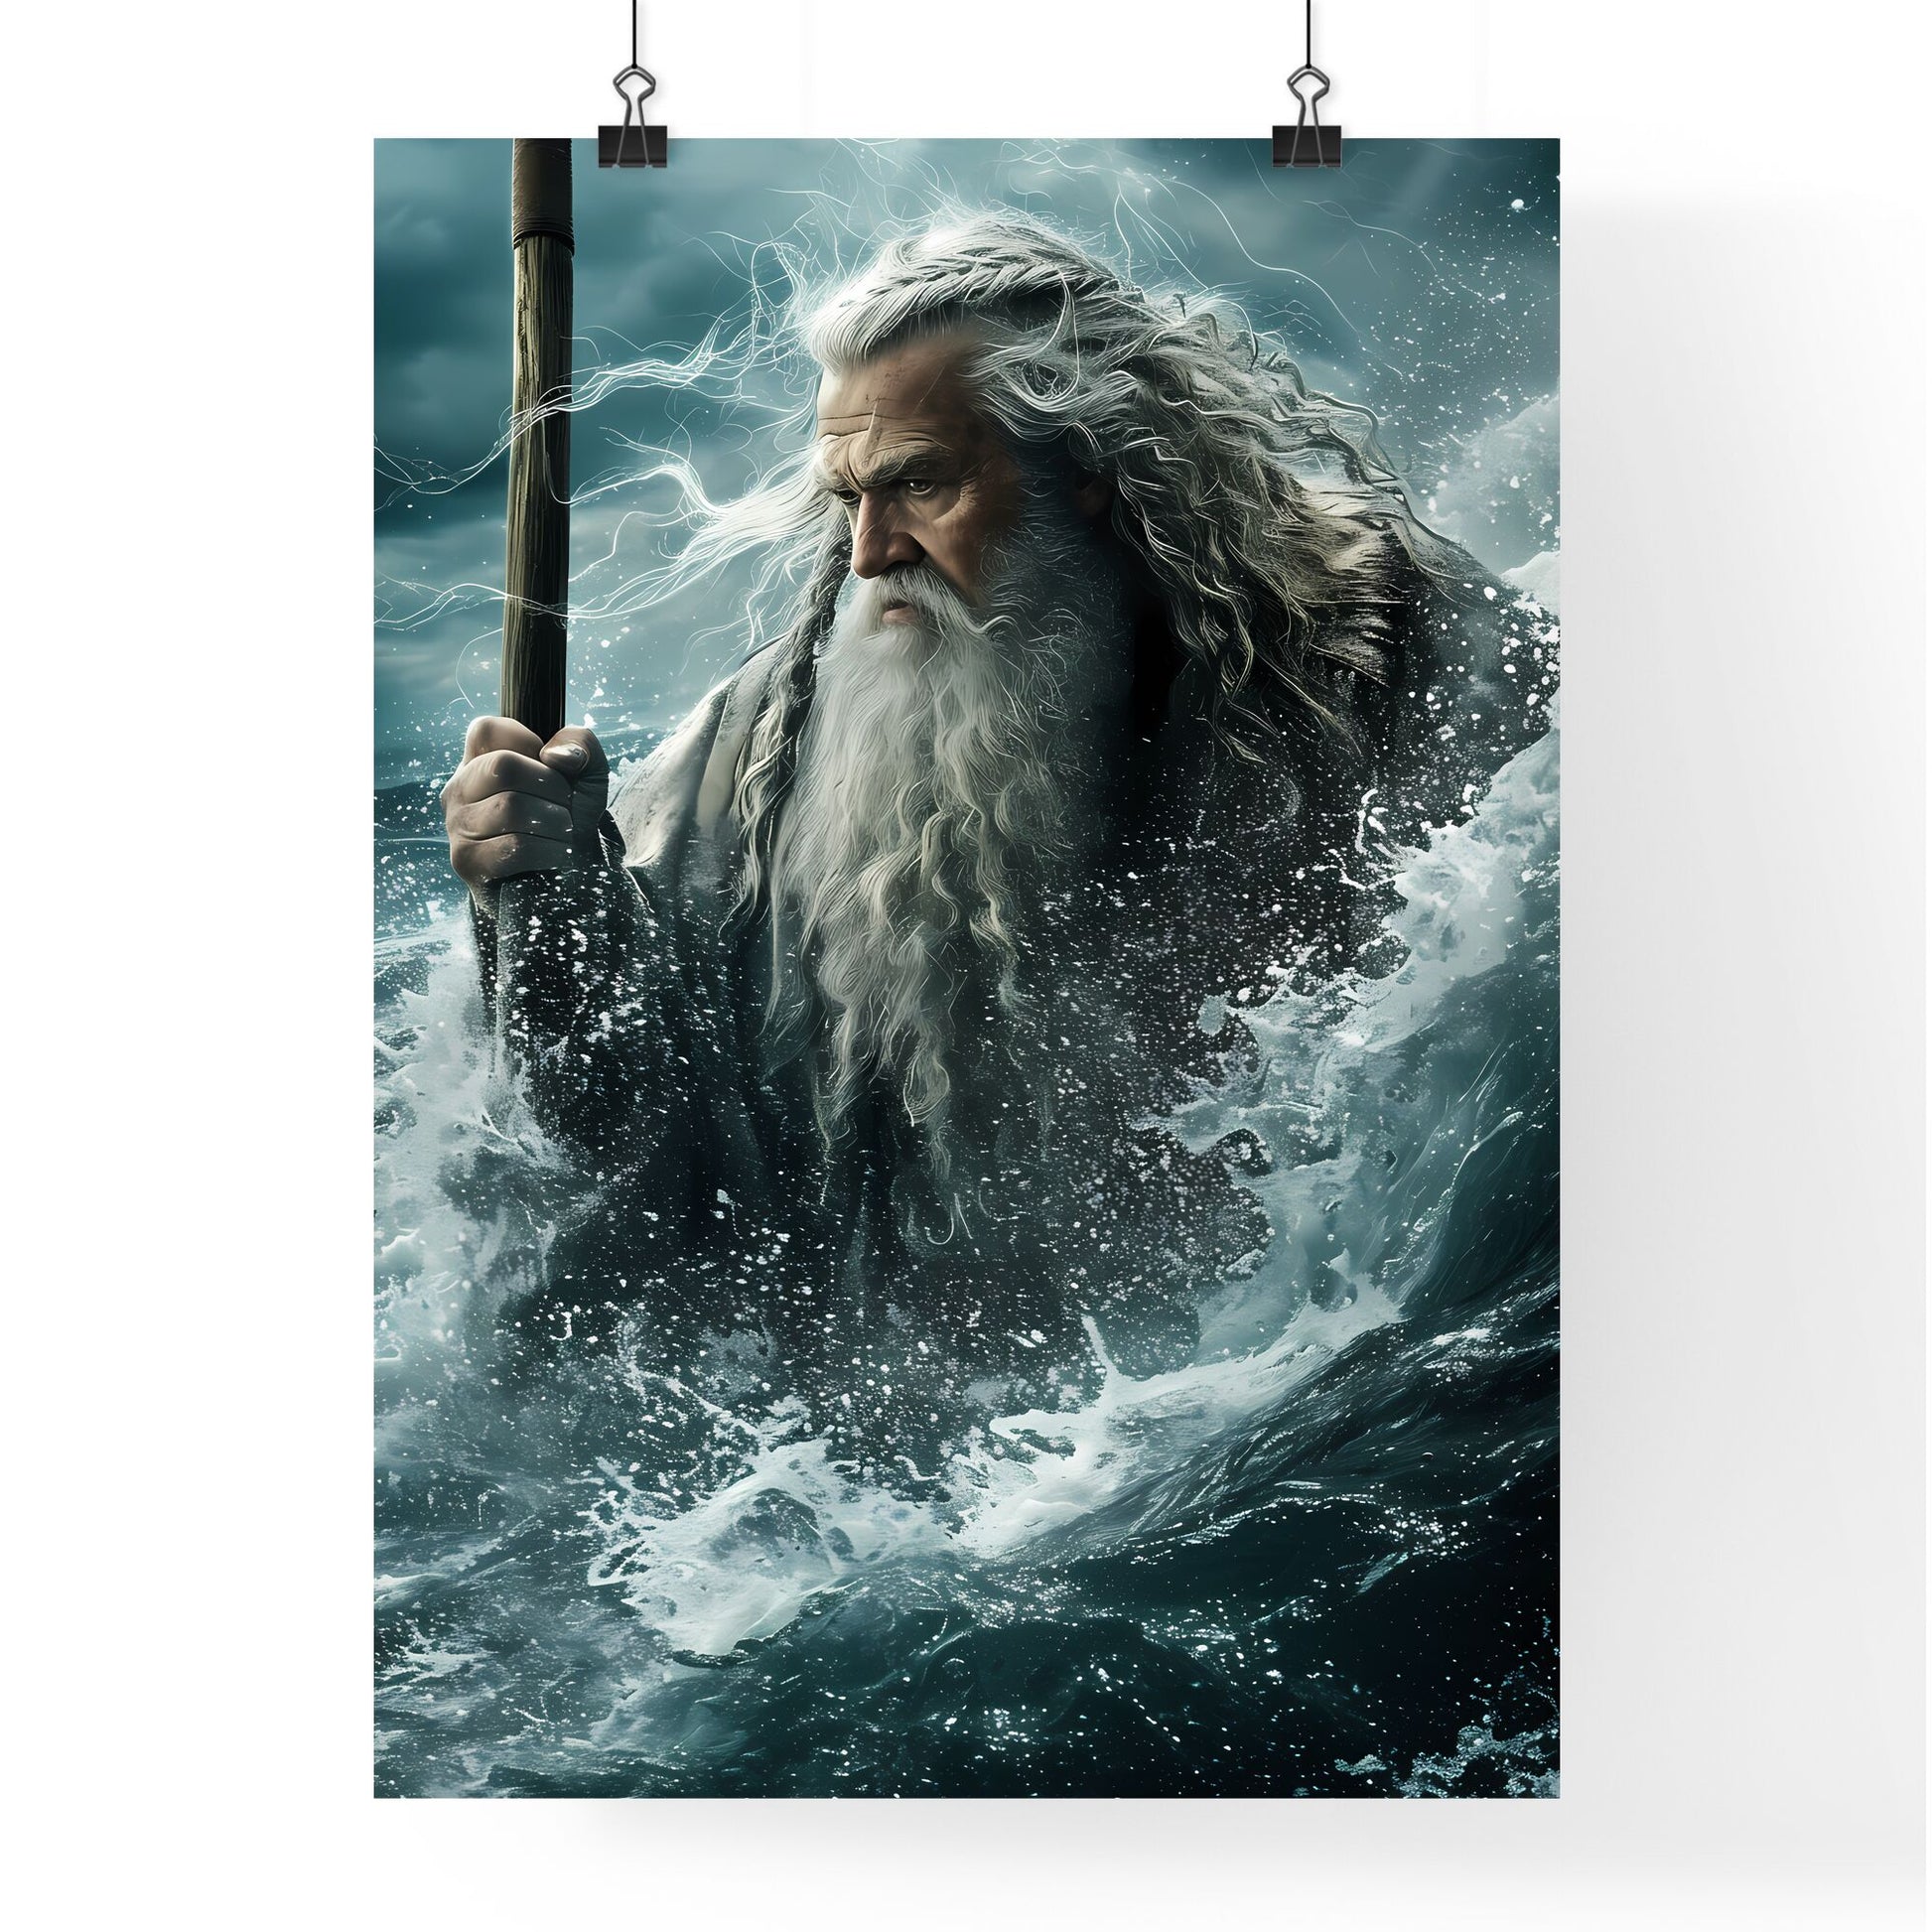 Movie poster Moses hoisting a magic staff above his head and leading many Israelites - Art print of a man with long white hair and a beard holding a staff in the water Default Title